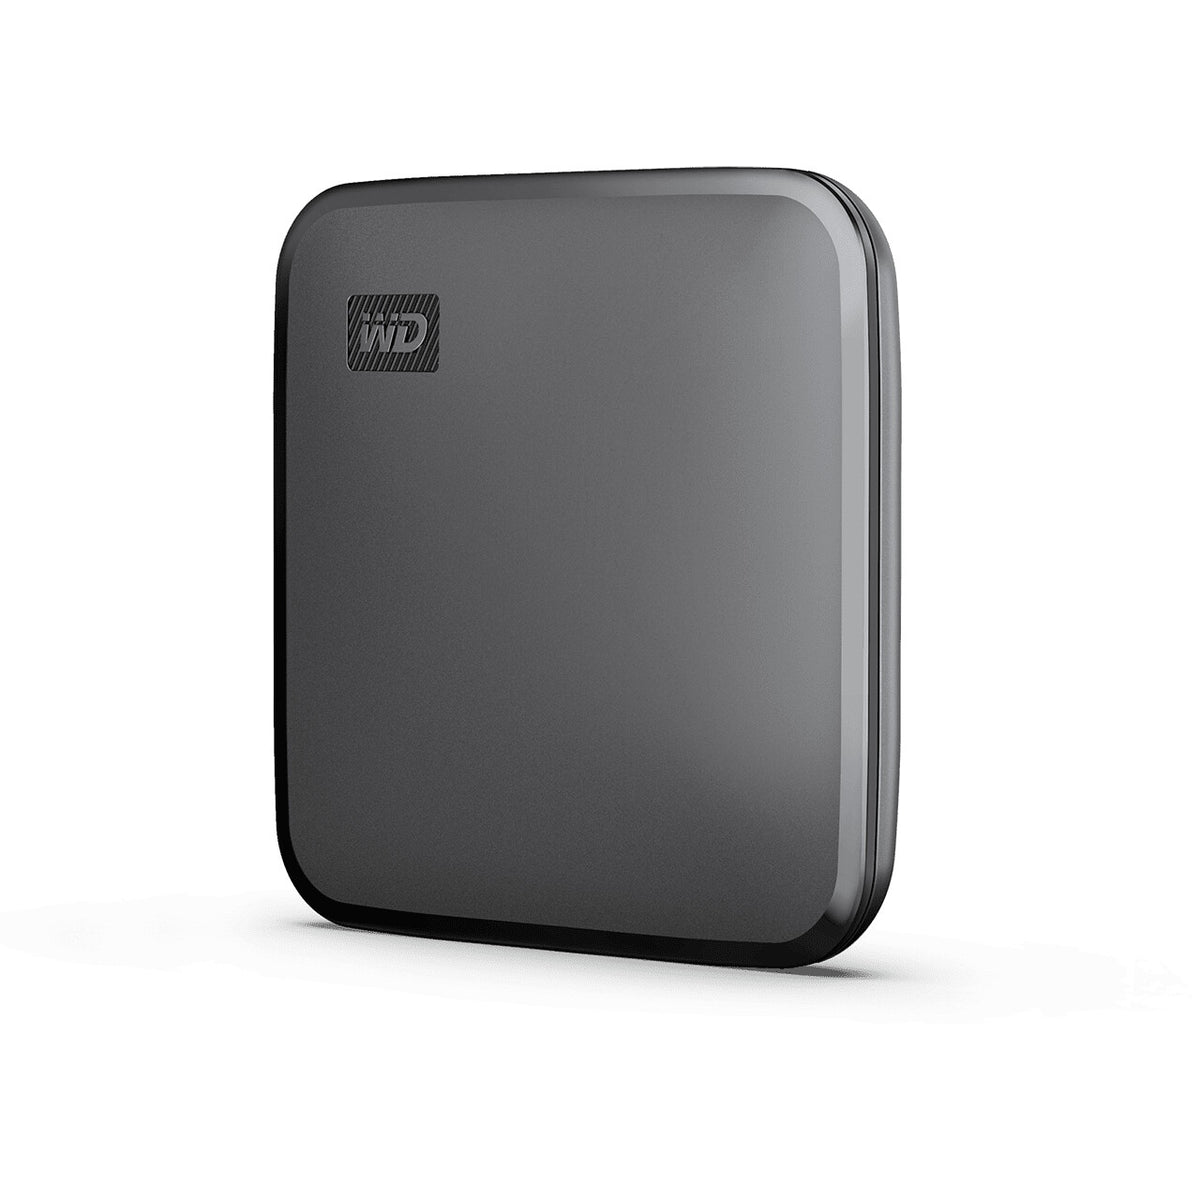 Western Digital WD Elements SE - External solid state drive in Black - 2 TB